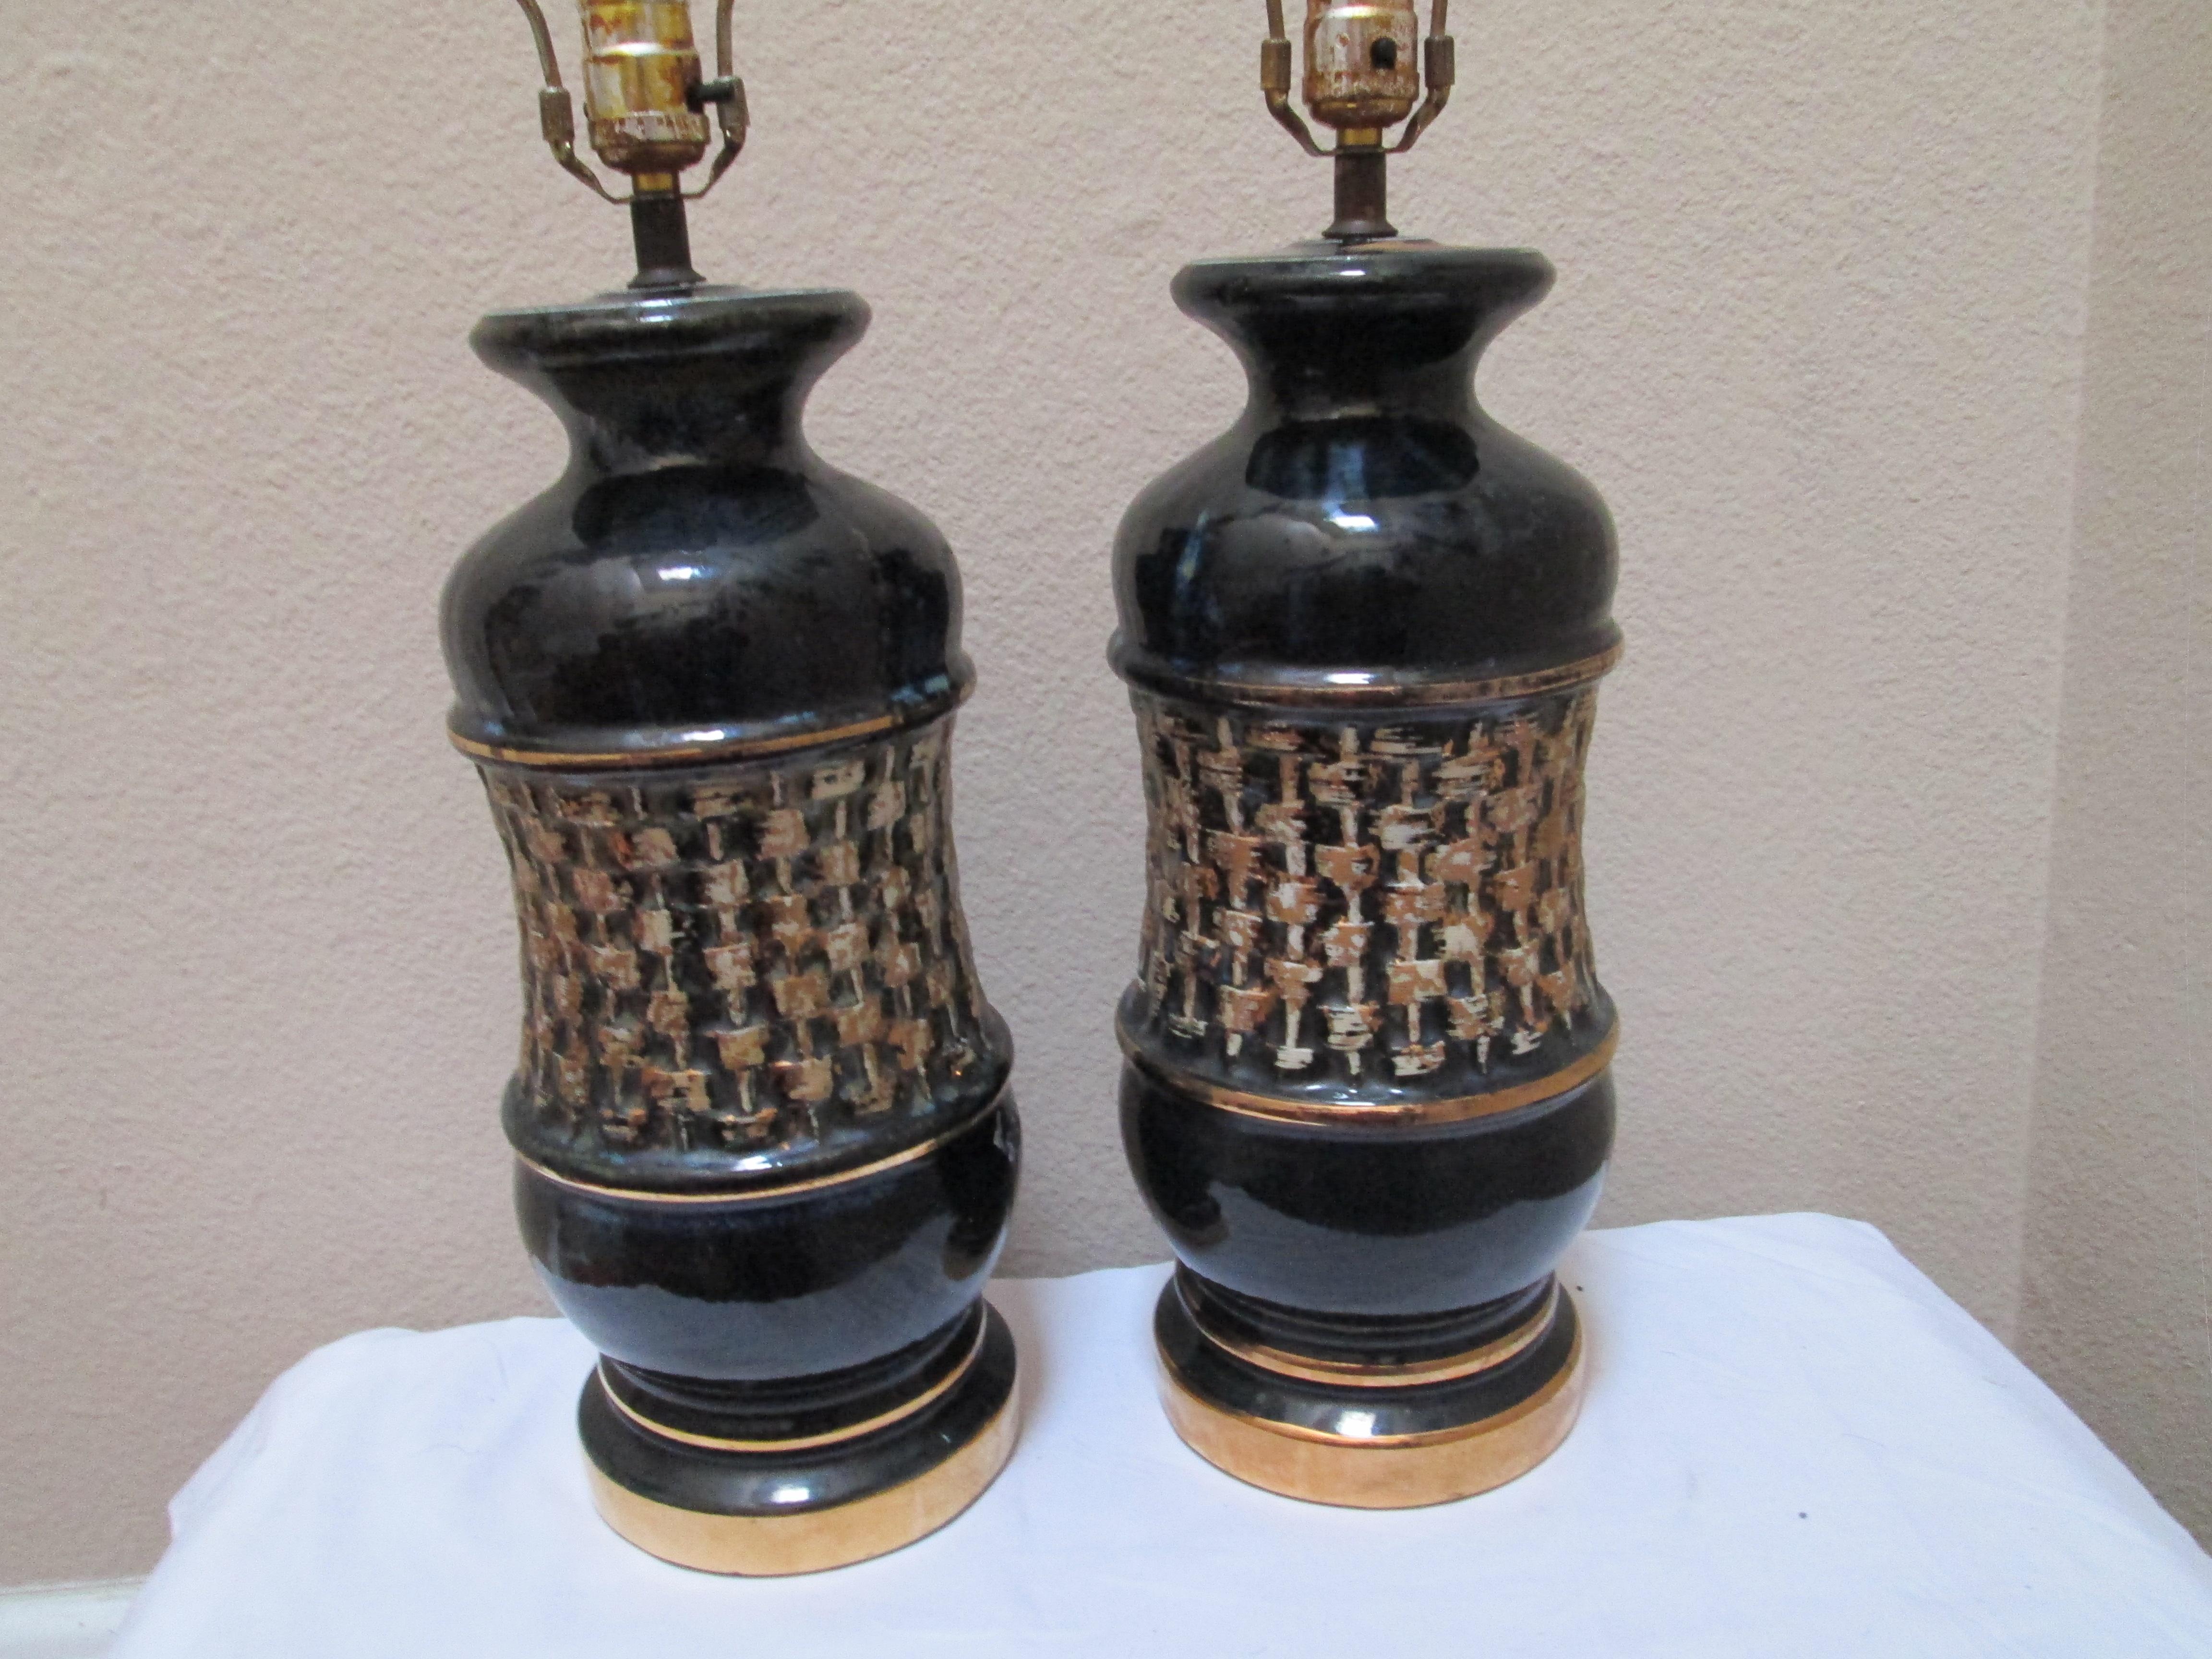 Iridescent Pair of Black and Gold Ceramic High Glaze Mid Century Table Lamps In Good Condition For Sale In Lomita, CA